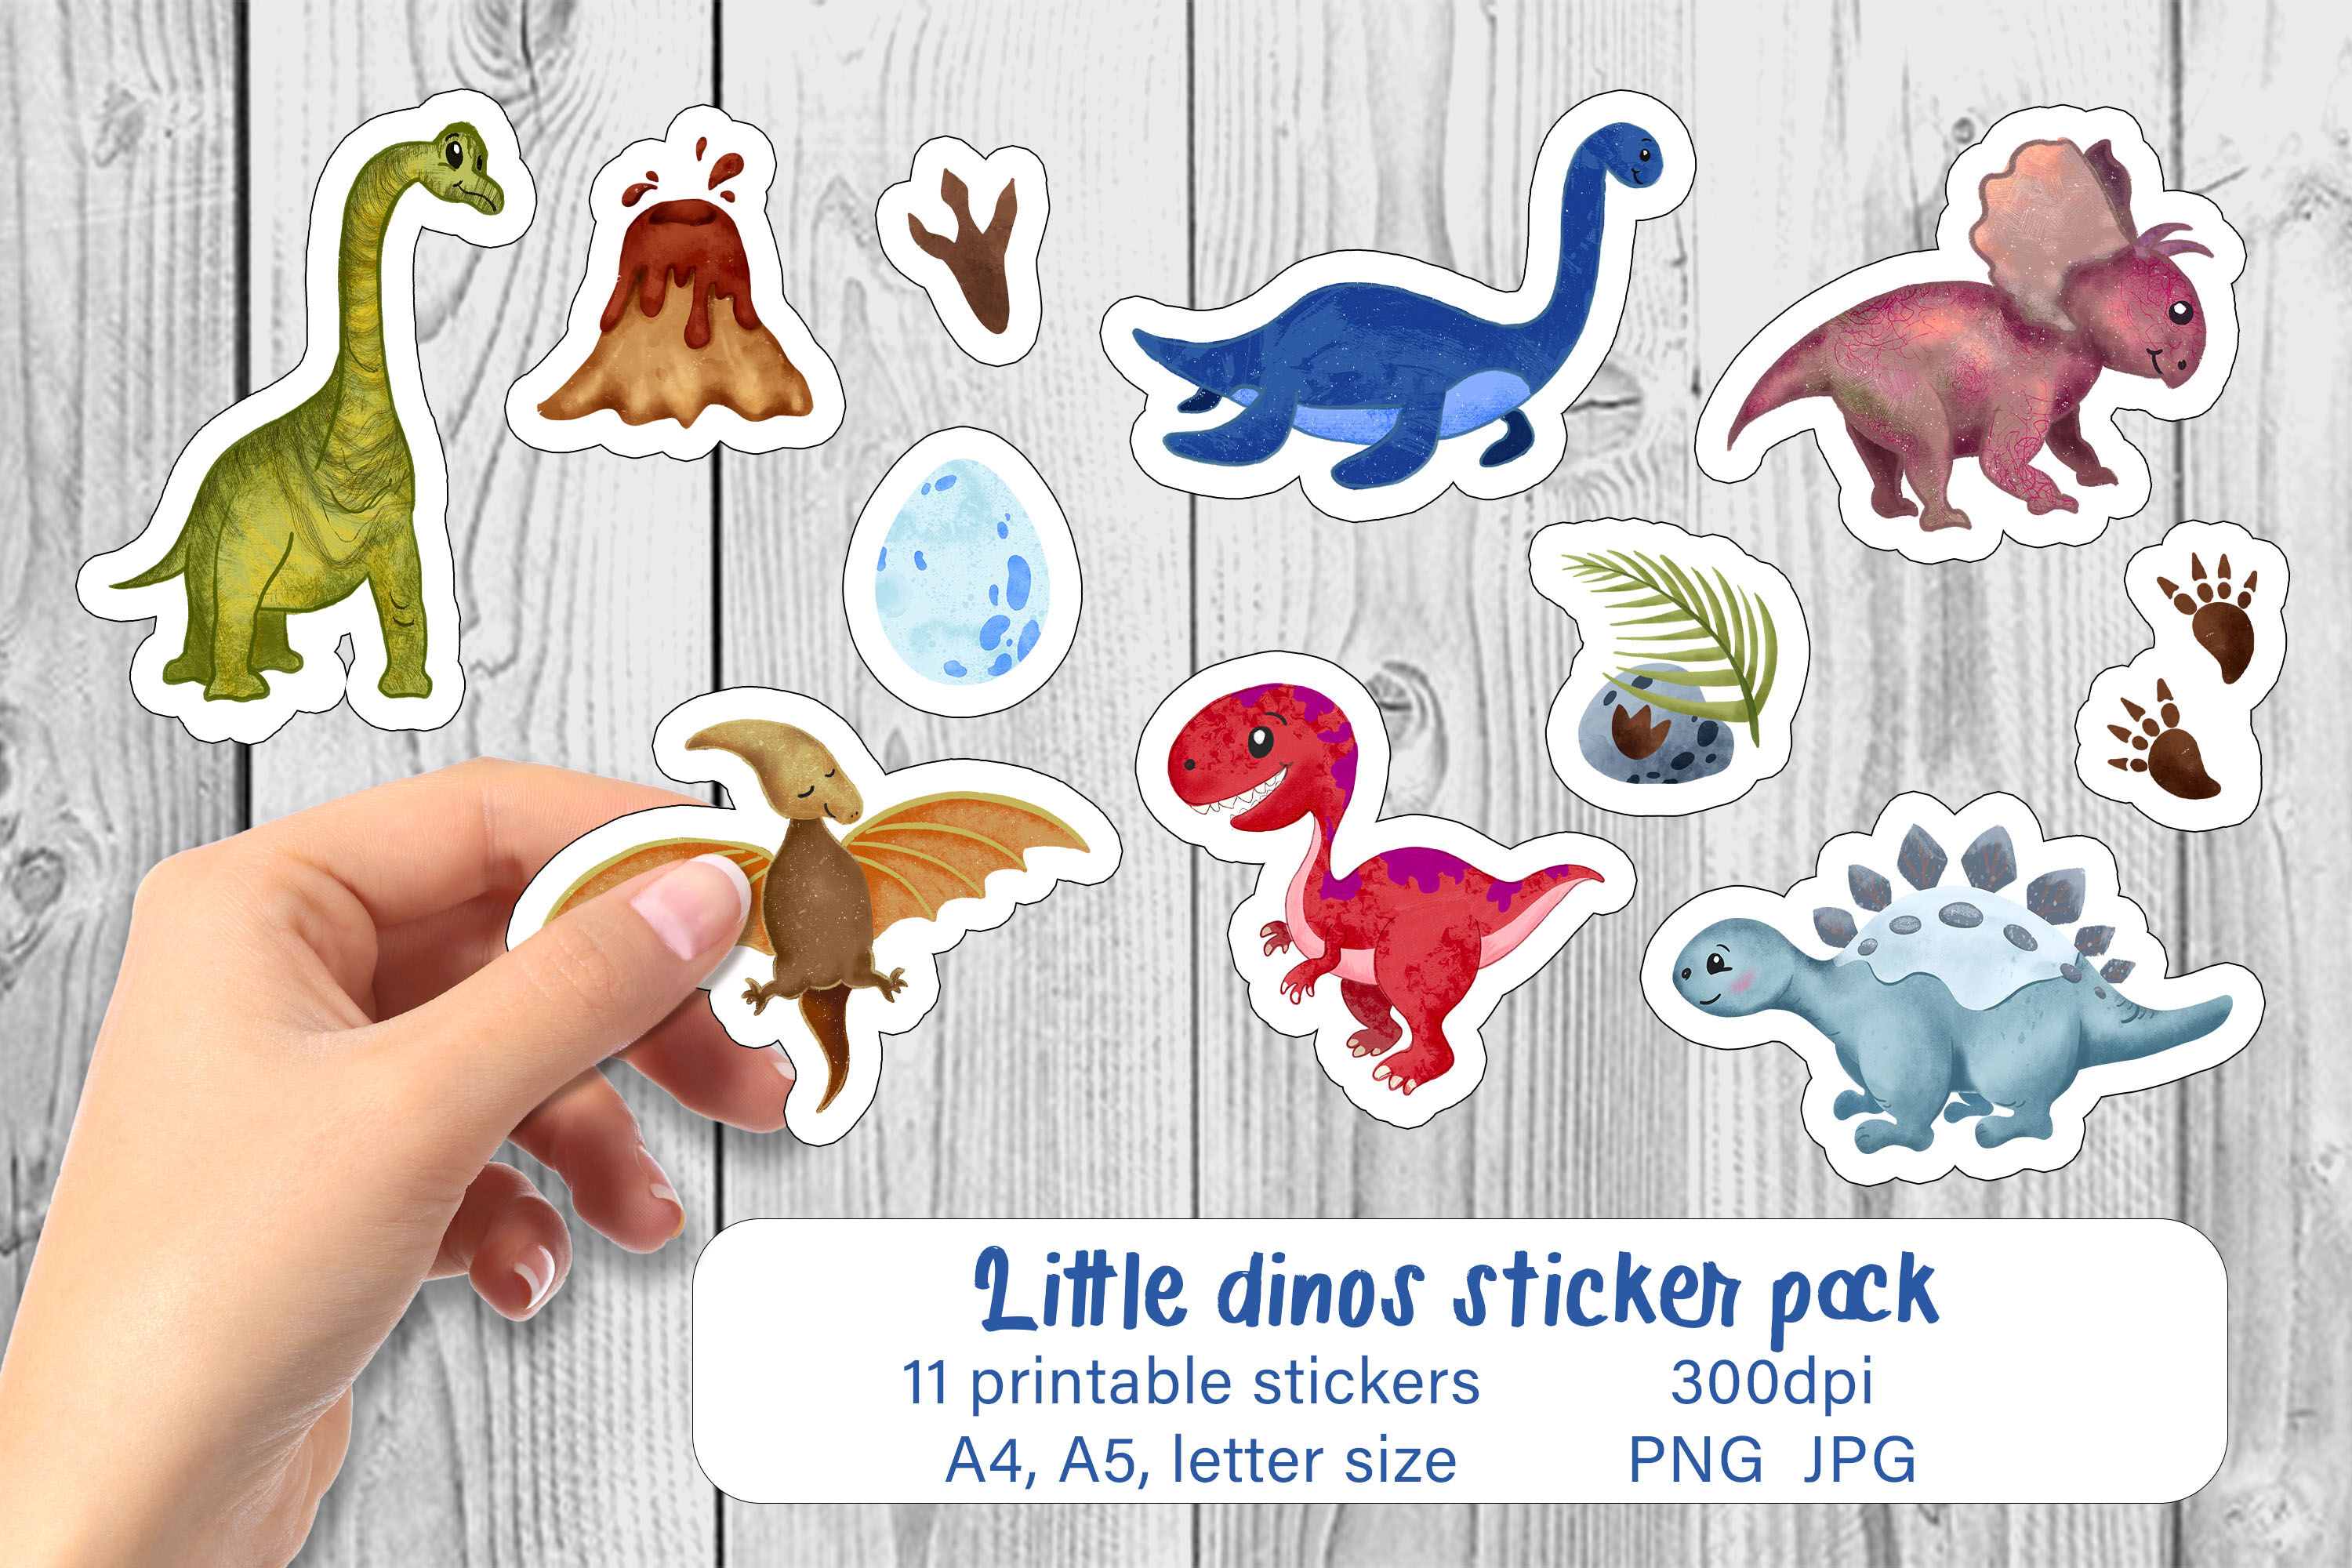 Dinosaur stickers Printable sticker pack / Stickers for kids By Shuneika